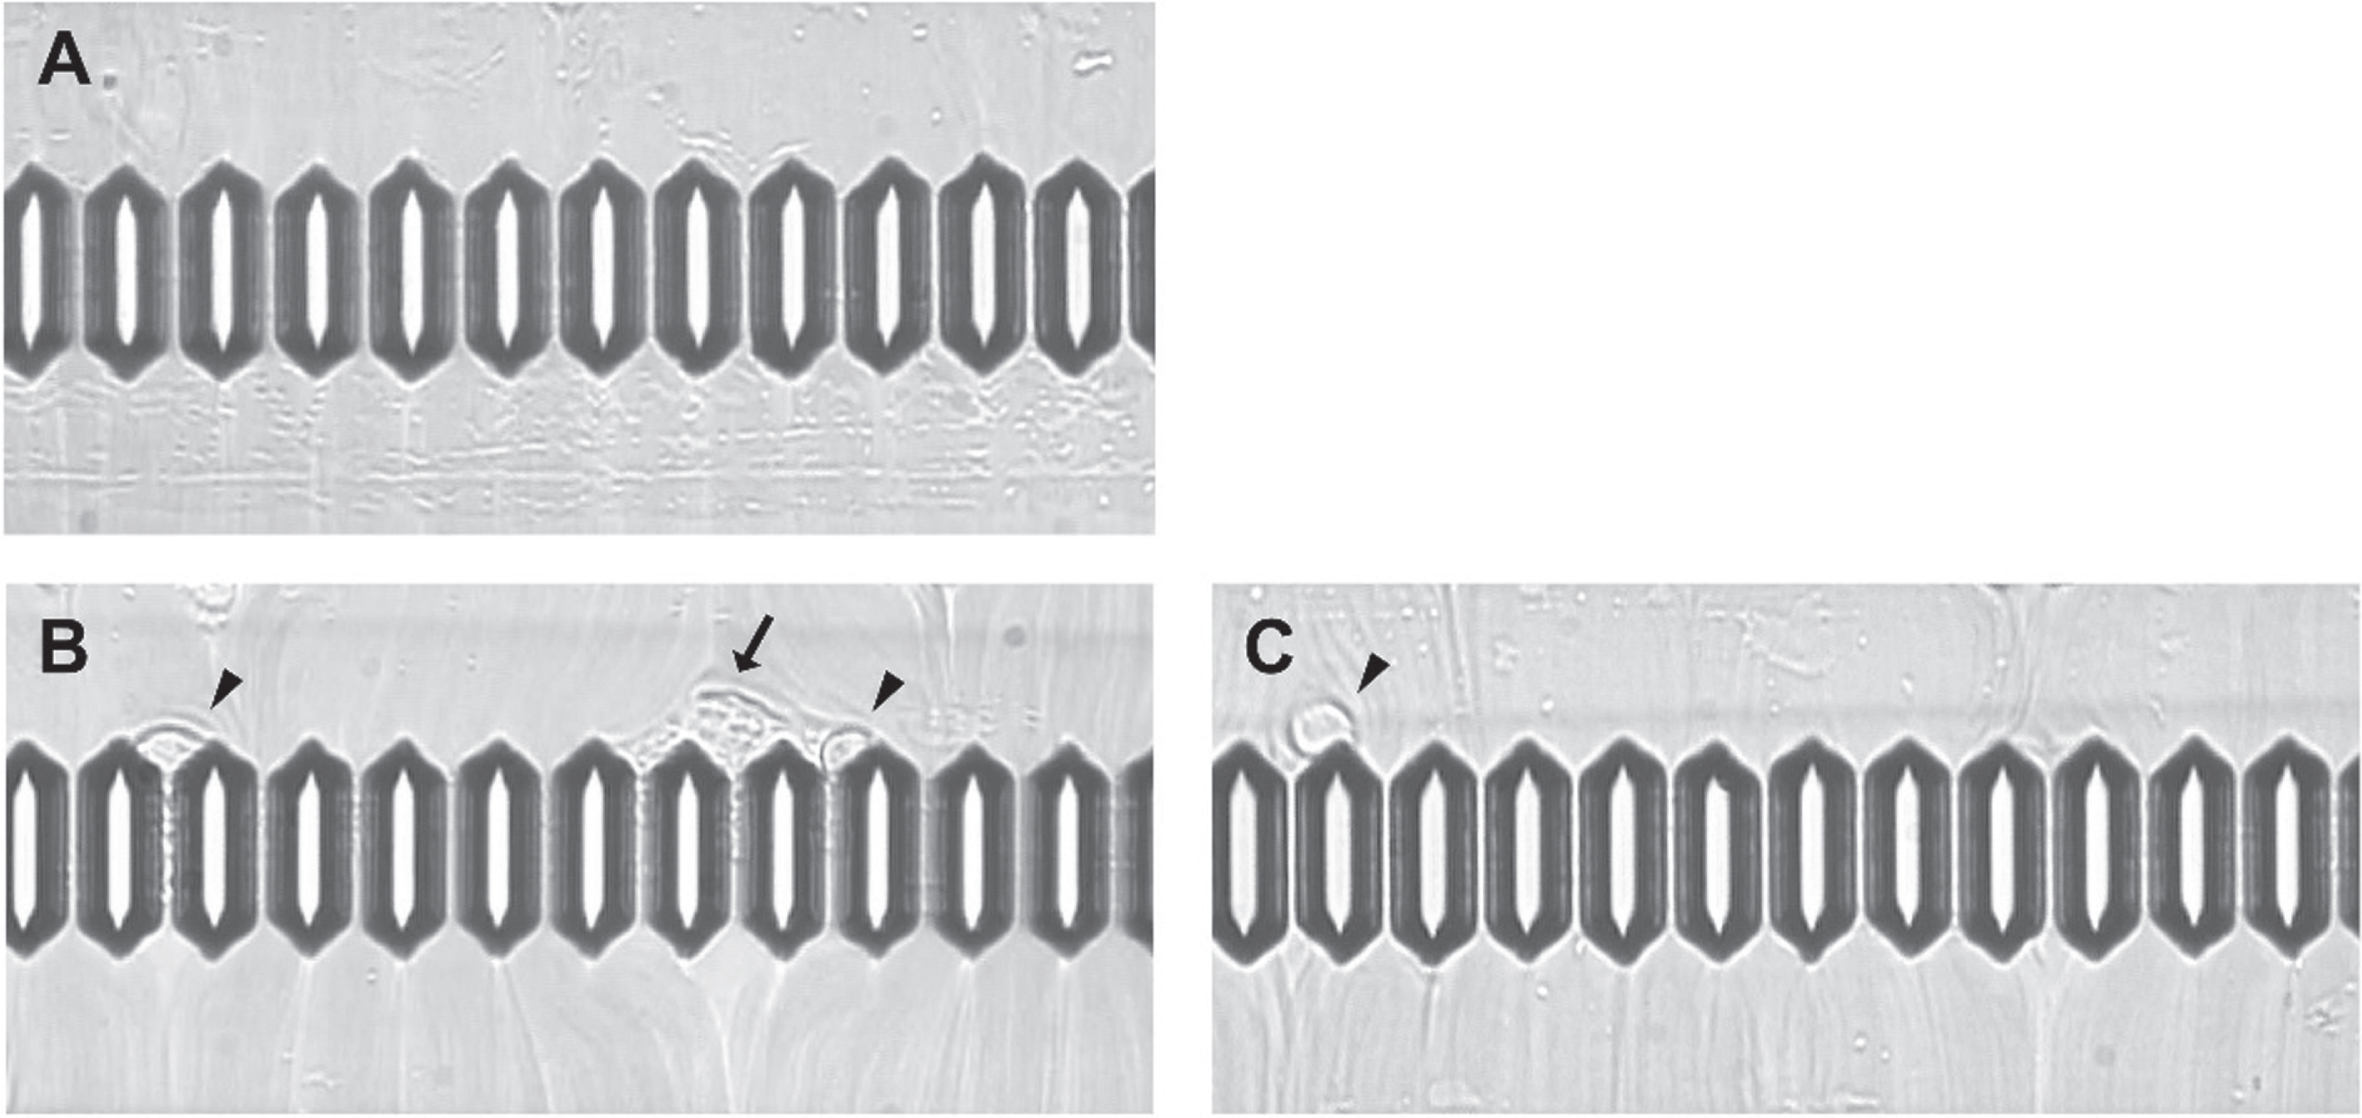 Micrographs of blood flow. Flow channel images (A) before exercise with 0 mM of L-arginine, (B) after exercise without L-arginine, and (C) after exercise with 1 mM of L-arginine. Arrow indicates aggregated platelets; arrowhead indicates adherent white blood cells.